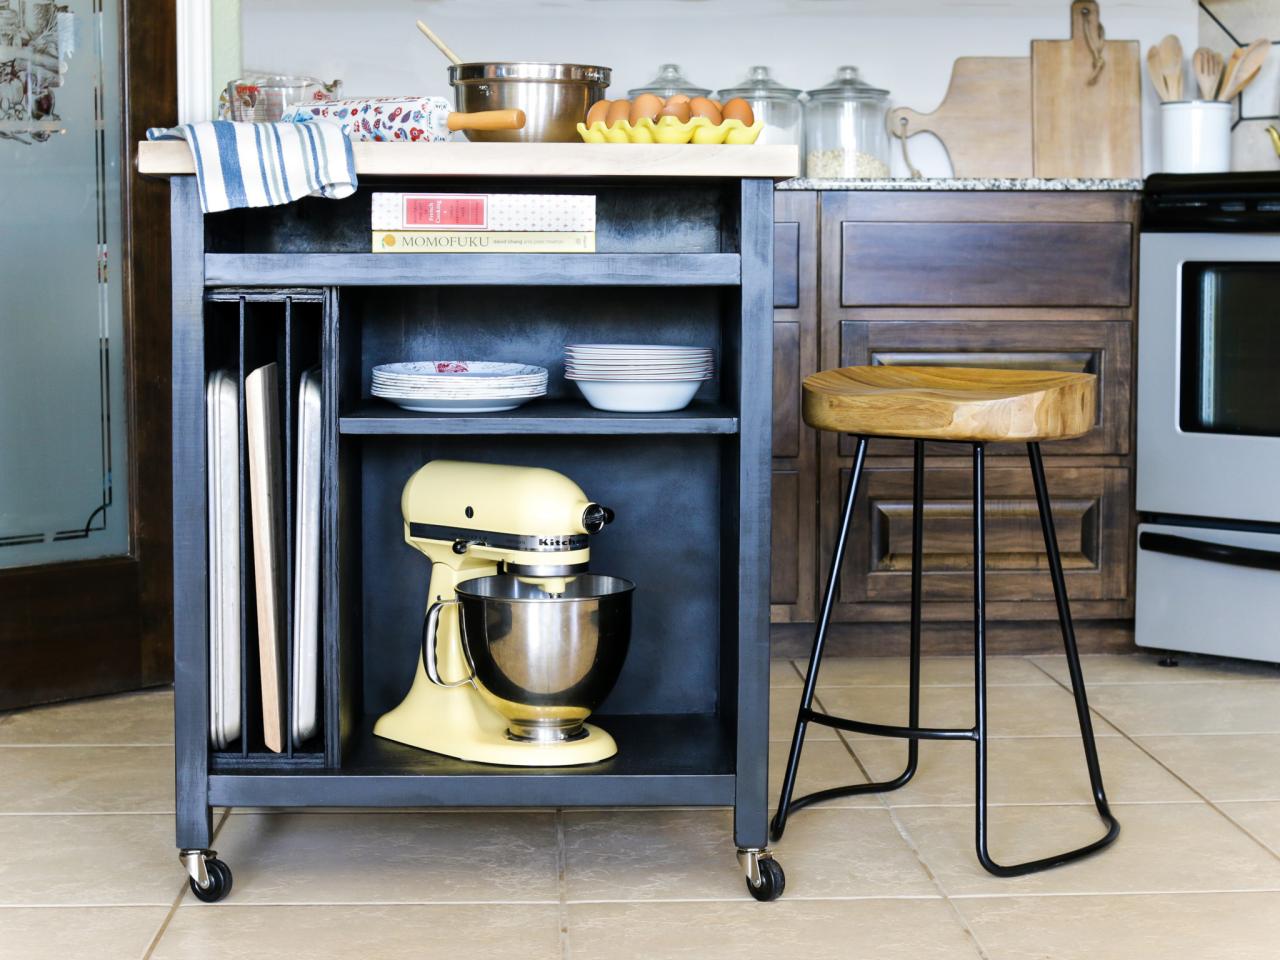 How to Build a DIY Kitchen Island on Wheels